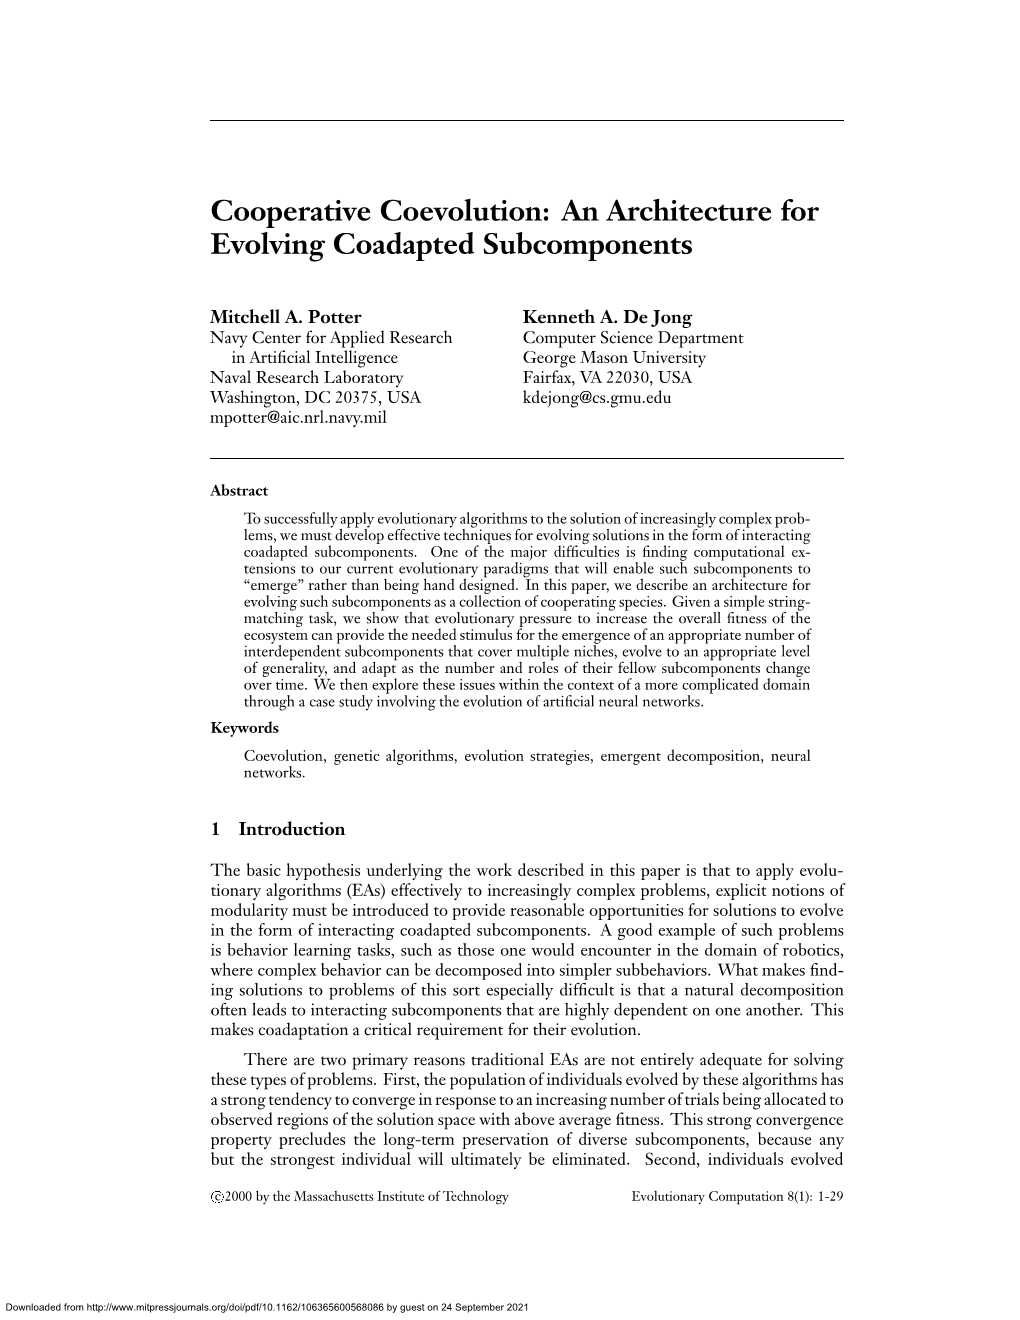 Cooperative Coevolution: an Architecture for Evolving Coadapted Subcomponents